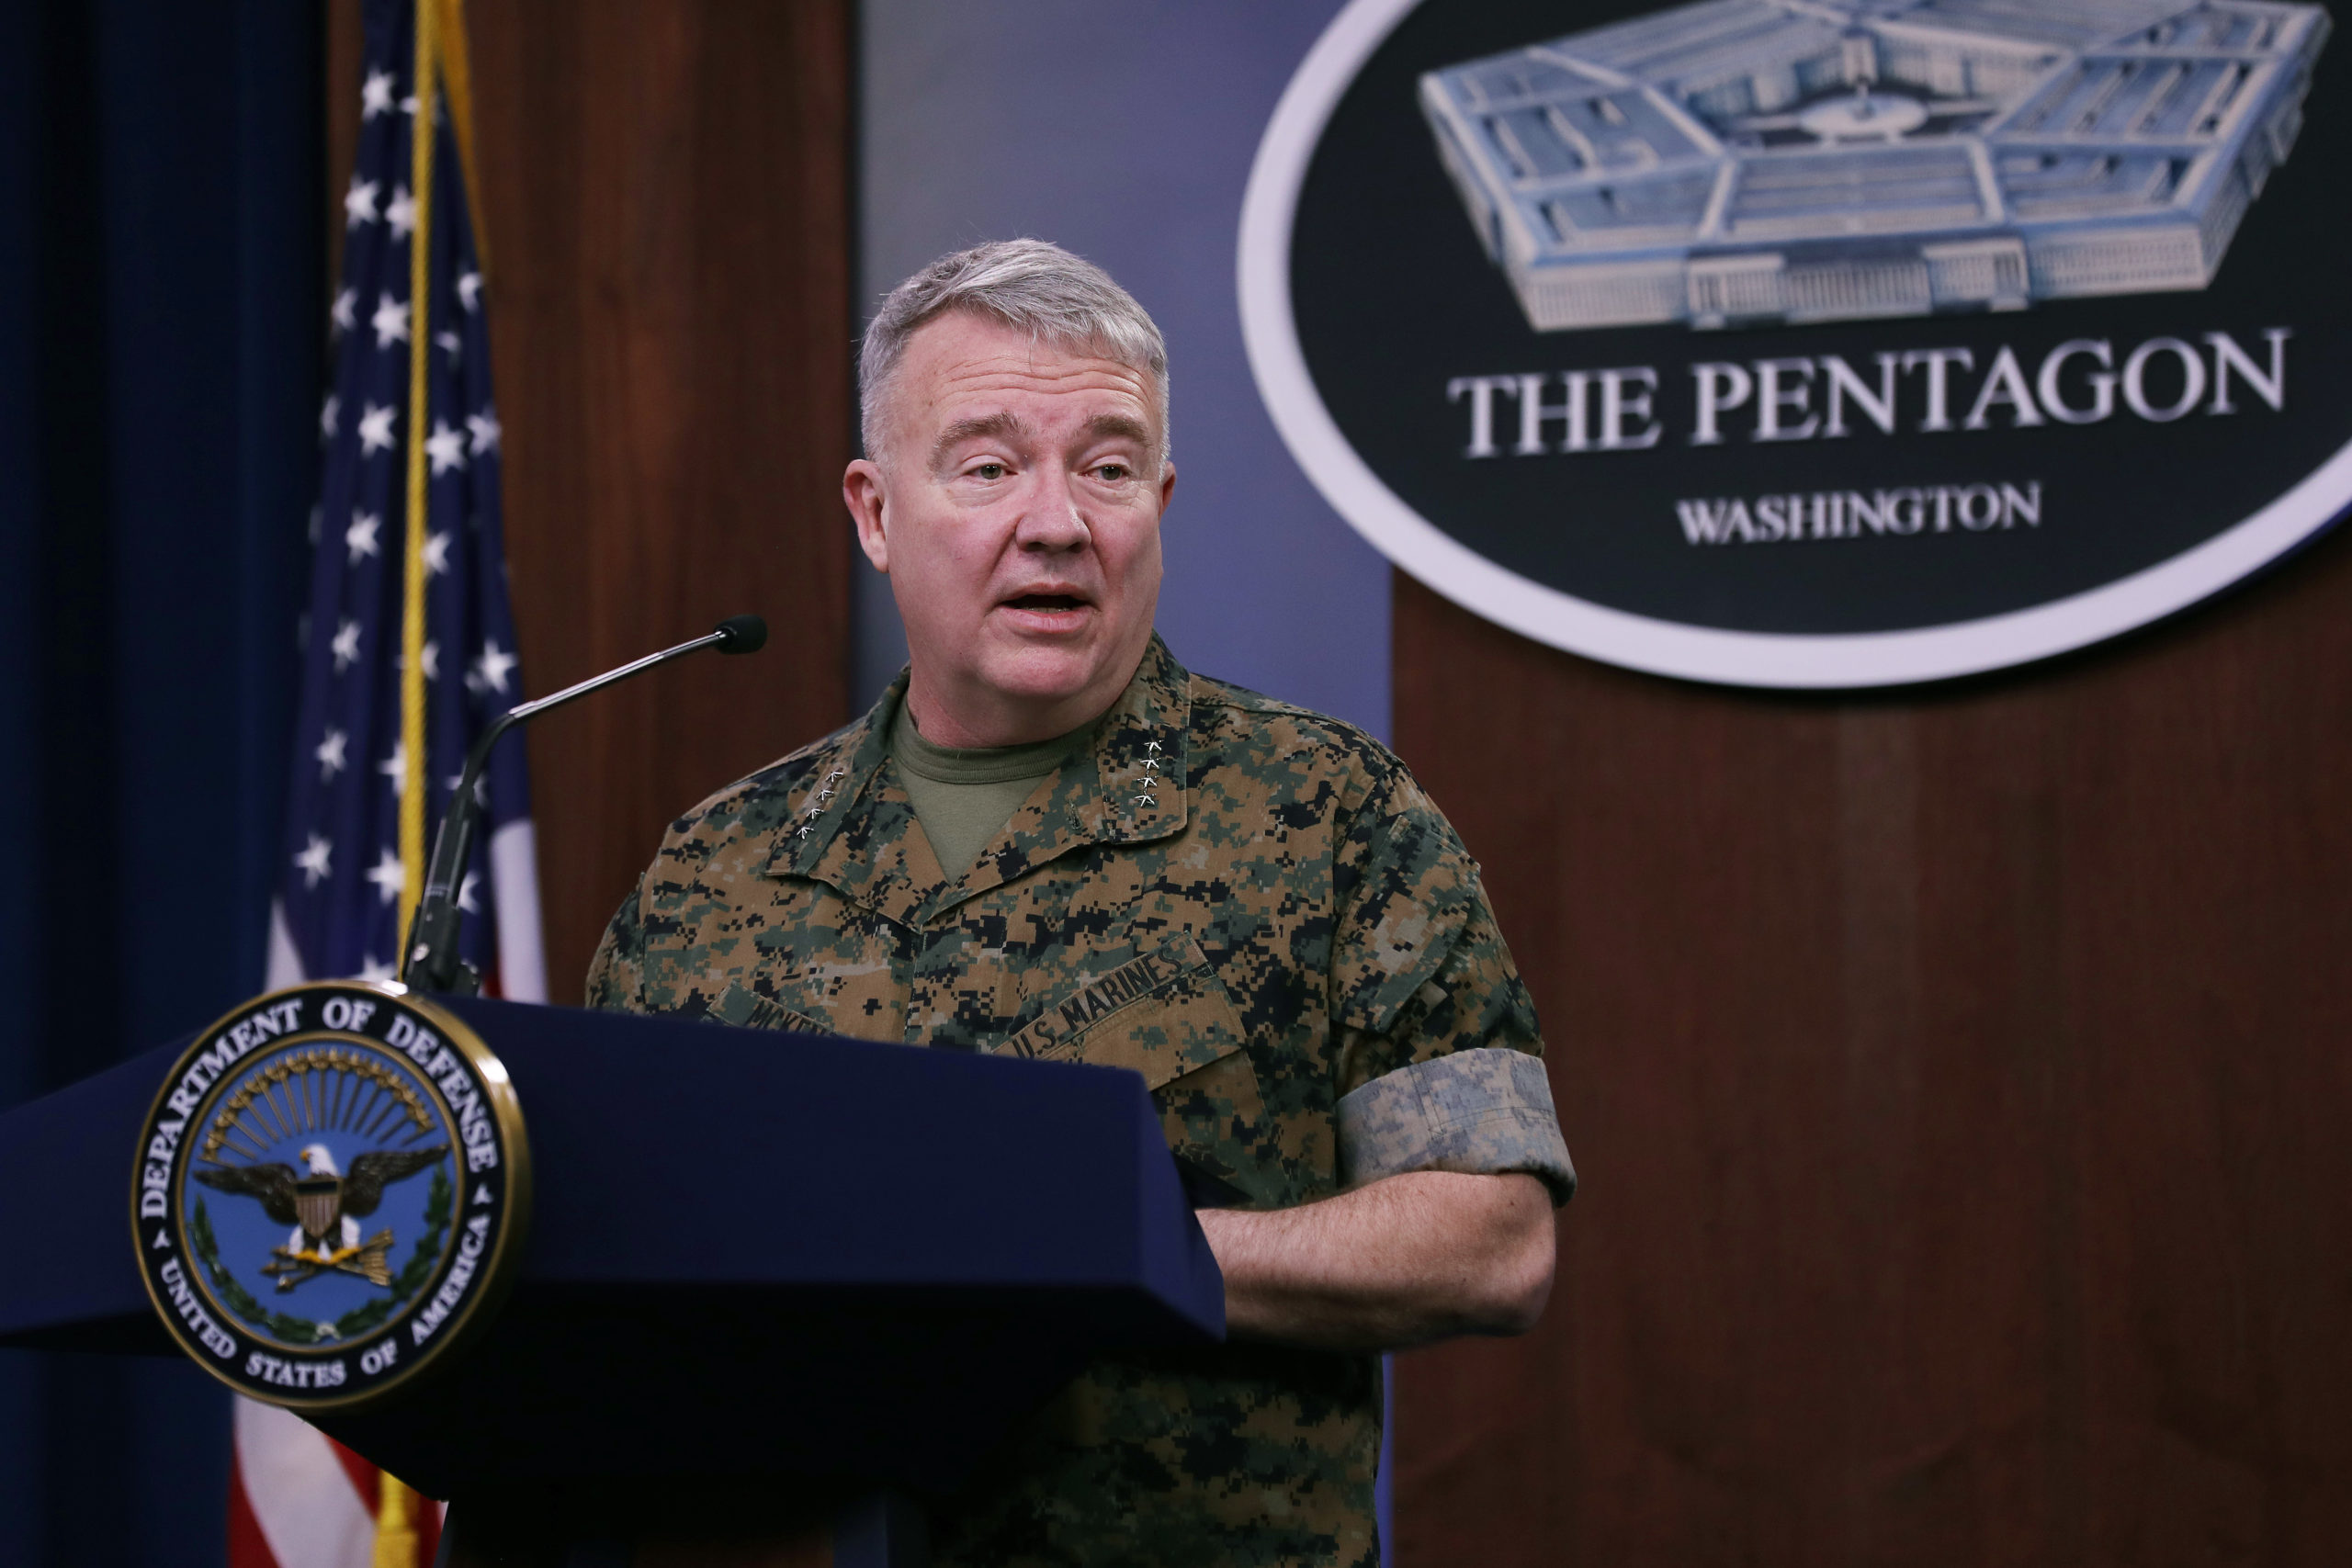 ARLINGTON, VIRGINIA - MARCH 13: Marine Corps Gen. Kenneth F. McKenzie, commander of U.S. Central Command, talks to journalists about the military response to rocket attacks that killed two U.S. and one U.K. service members in Iraq during a news briefing at the Pentagon March 13, 2020 in Arlington, Virginia. Because of the threat of transmission of the novel coronavirus (COVID-19), the Pentagon is exercising social distancing by keeping reporters' chairs four feet apart from each other during briefings. (Photo by Chip Somodevilla/Getty Images)